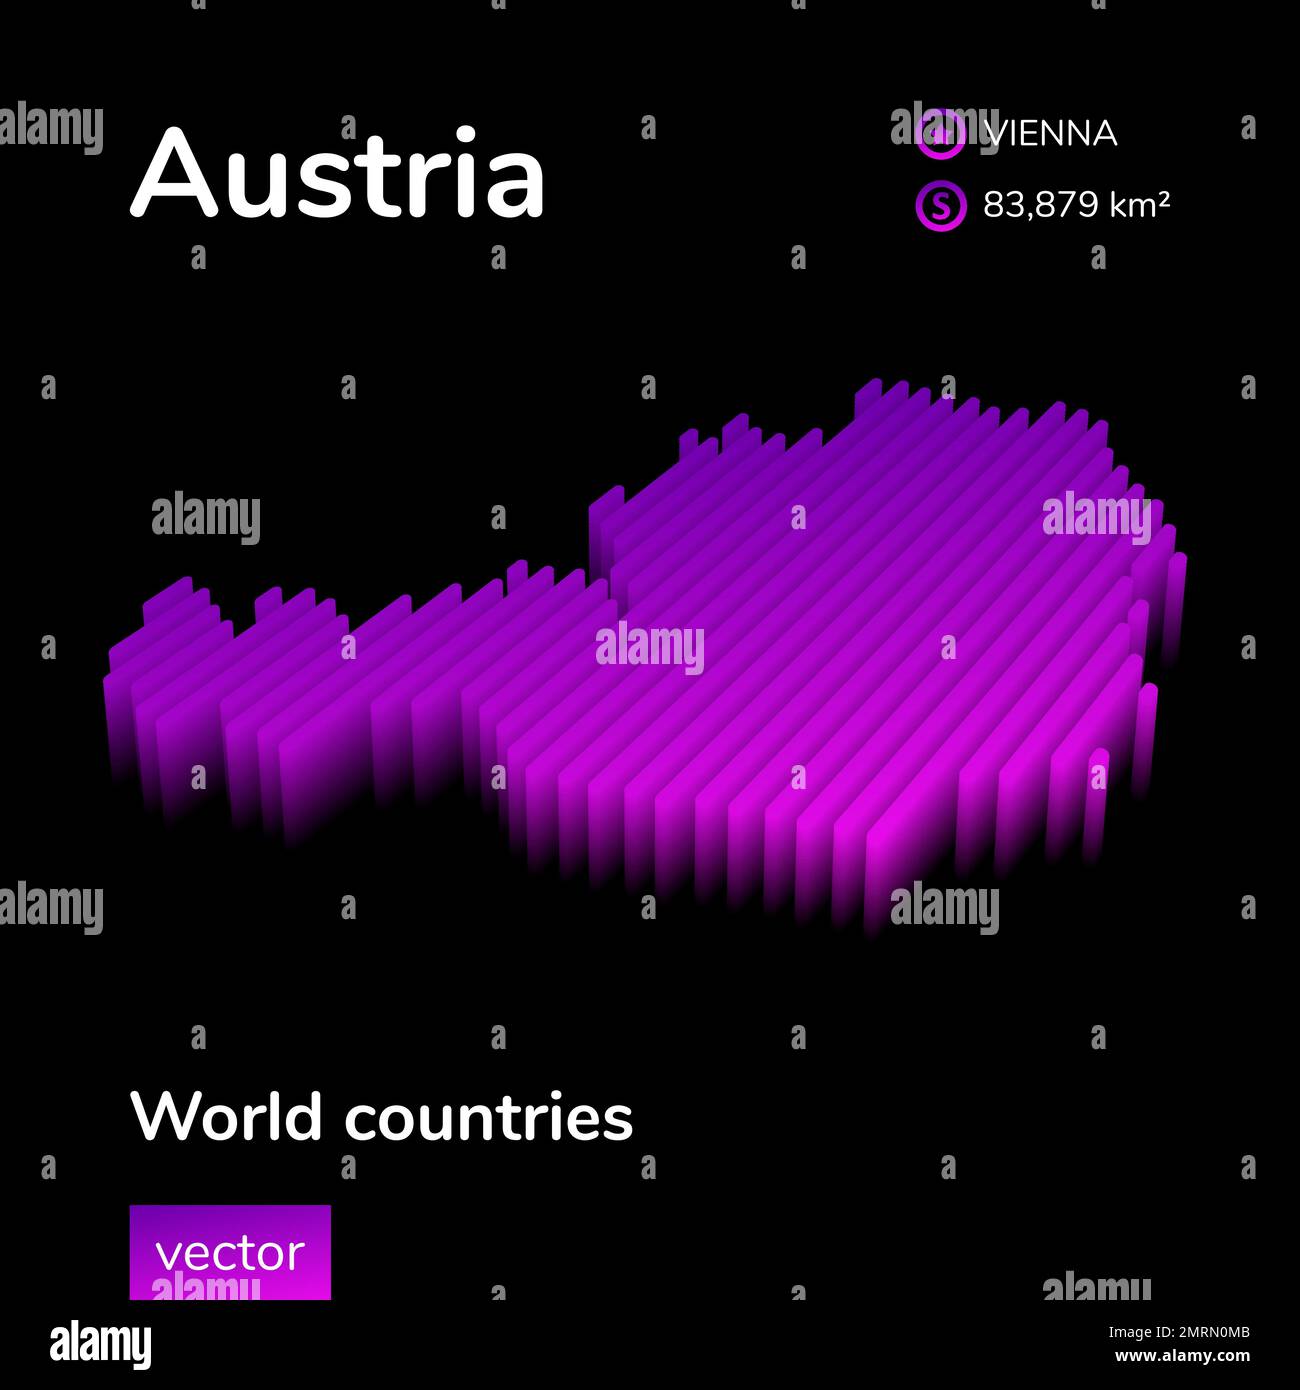 Stylized neon digital isometric striped vector Austria map with 3d effect. Map of Austria is in violet and pink colors on the black background Stock Vector